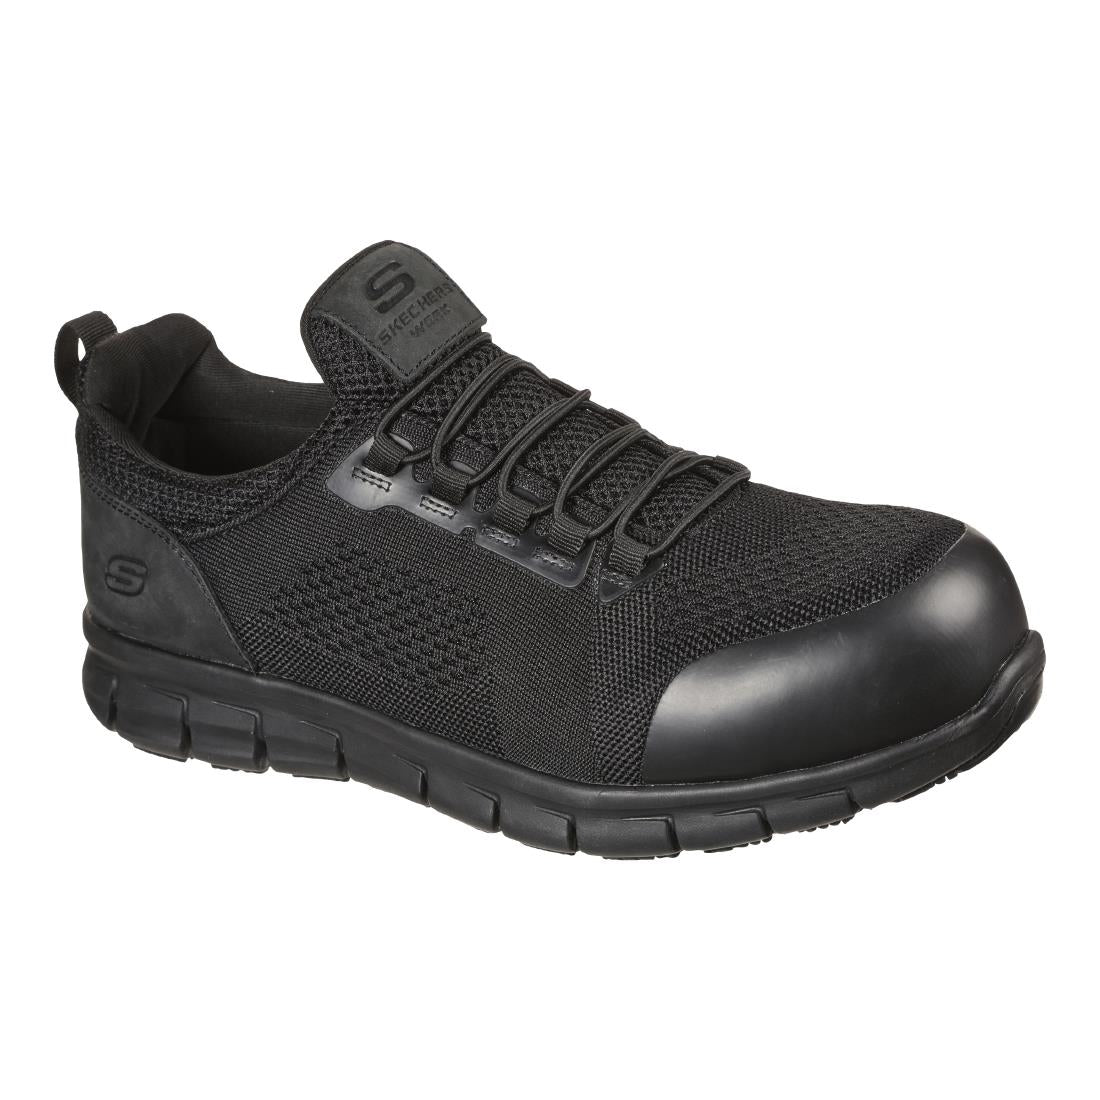 BB675-43 Skechers Safety Shoe with Steel Toe Cap Size 43 JD Catering Equipment Solutions Ltd